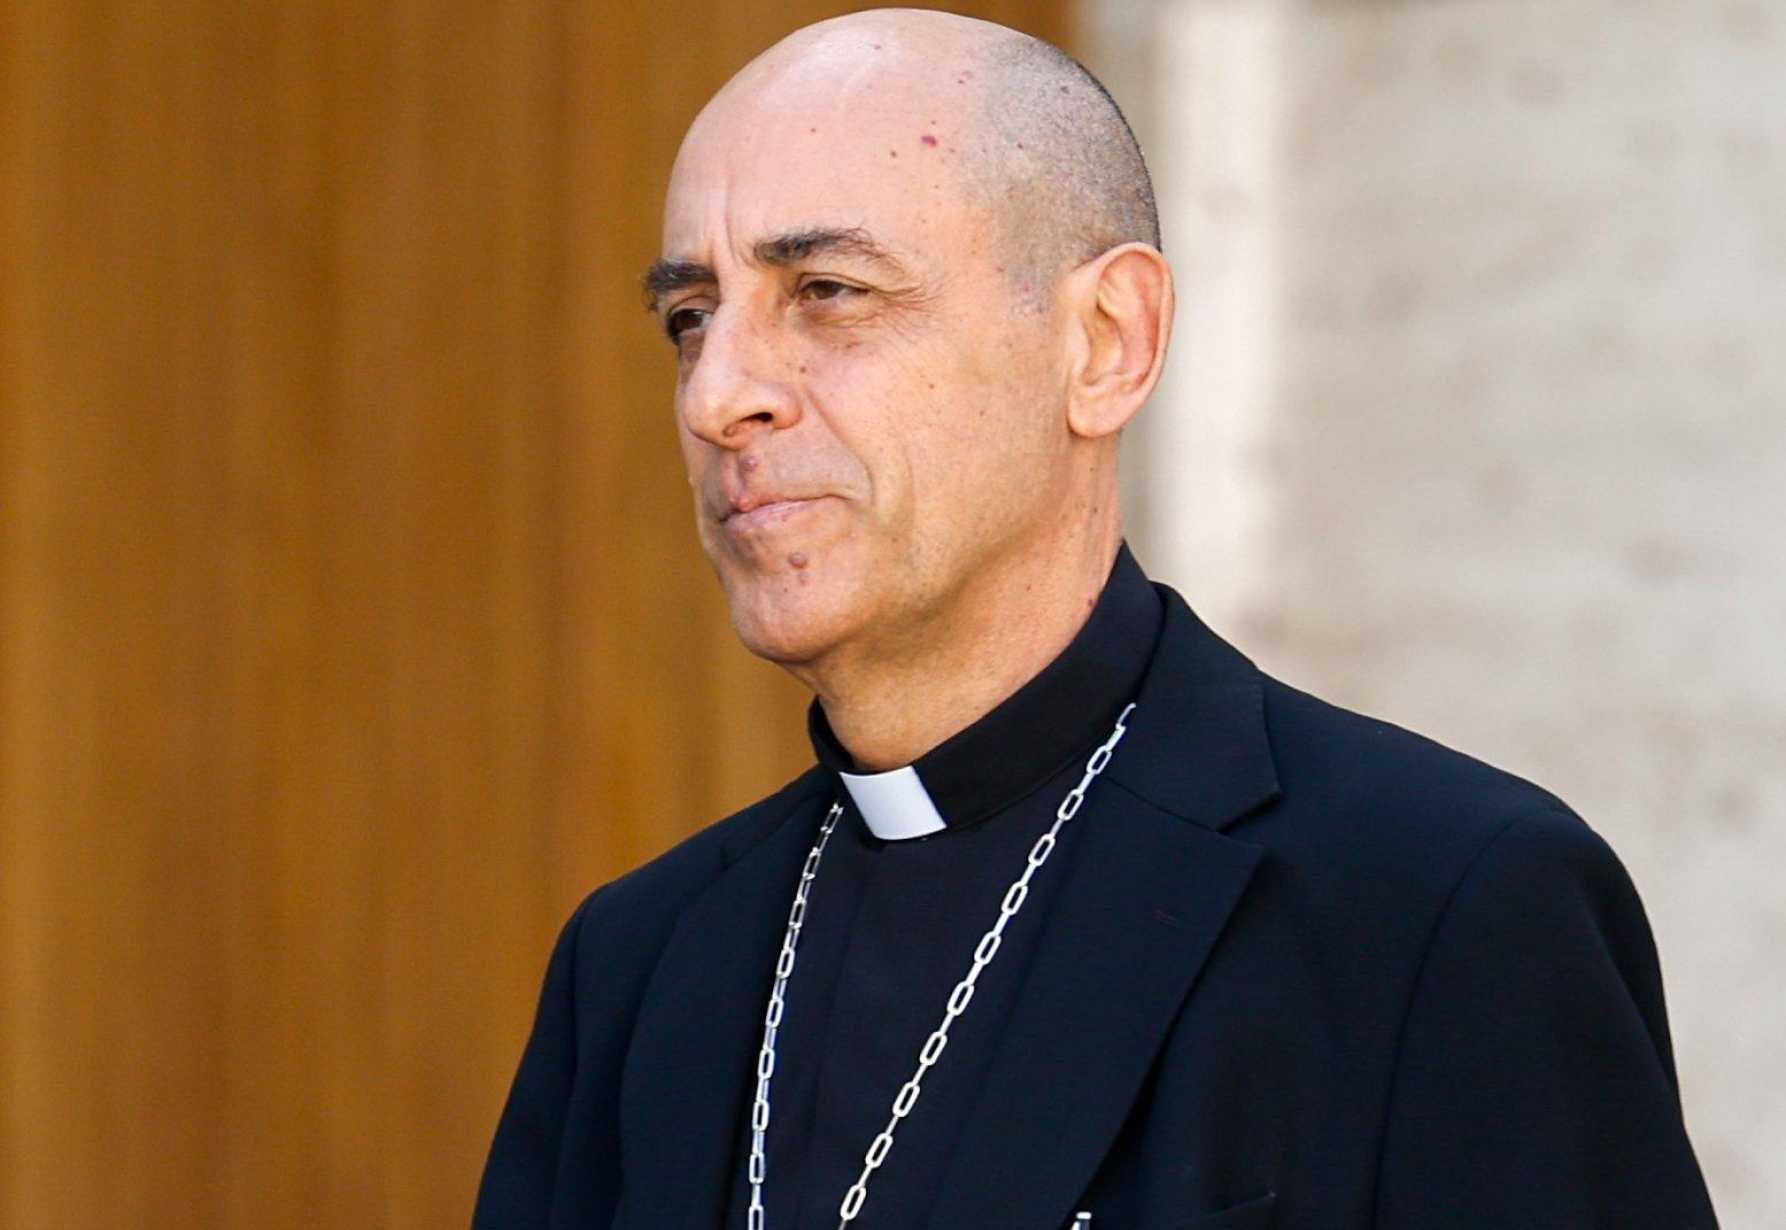 Cardinal says Vatican is not moving toward accepting gay marriage